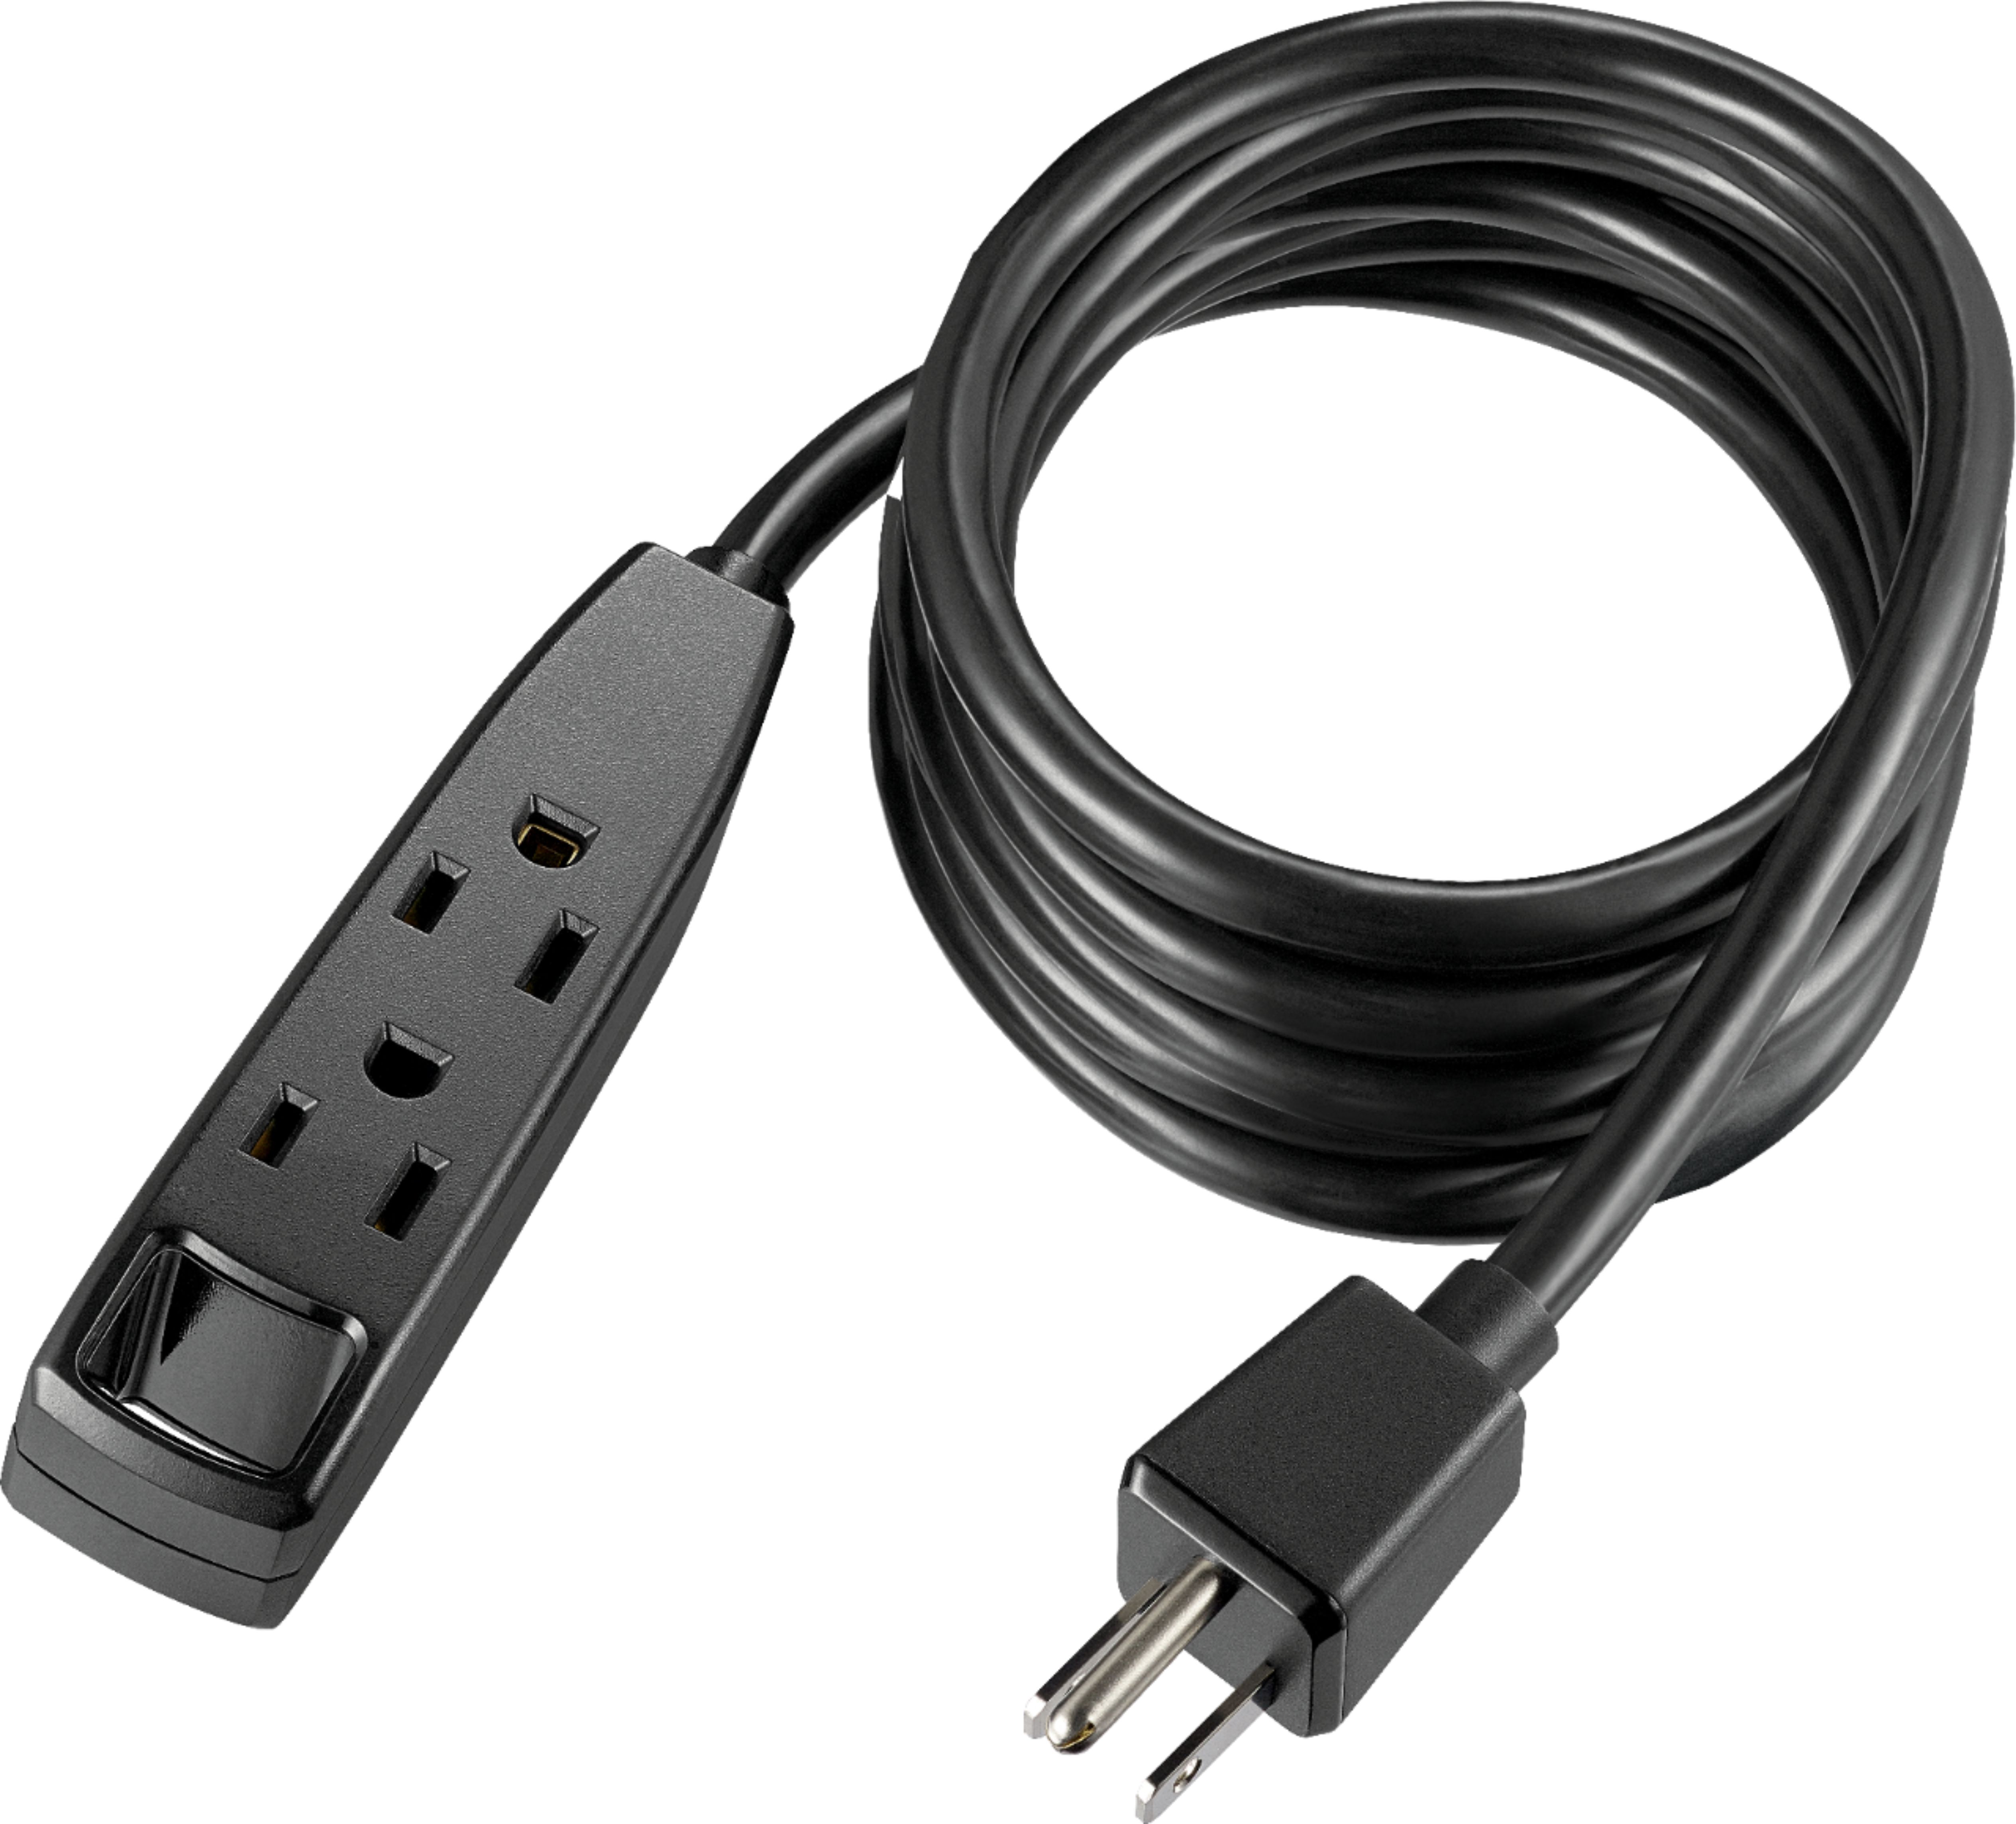 Extension Cord, Extension Socket, Power Cord 3 Meter 5 way with